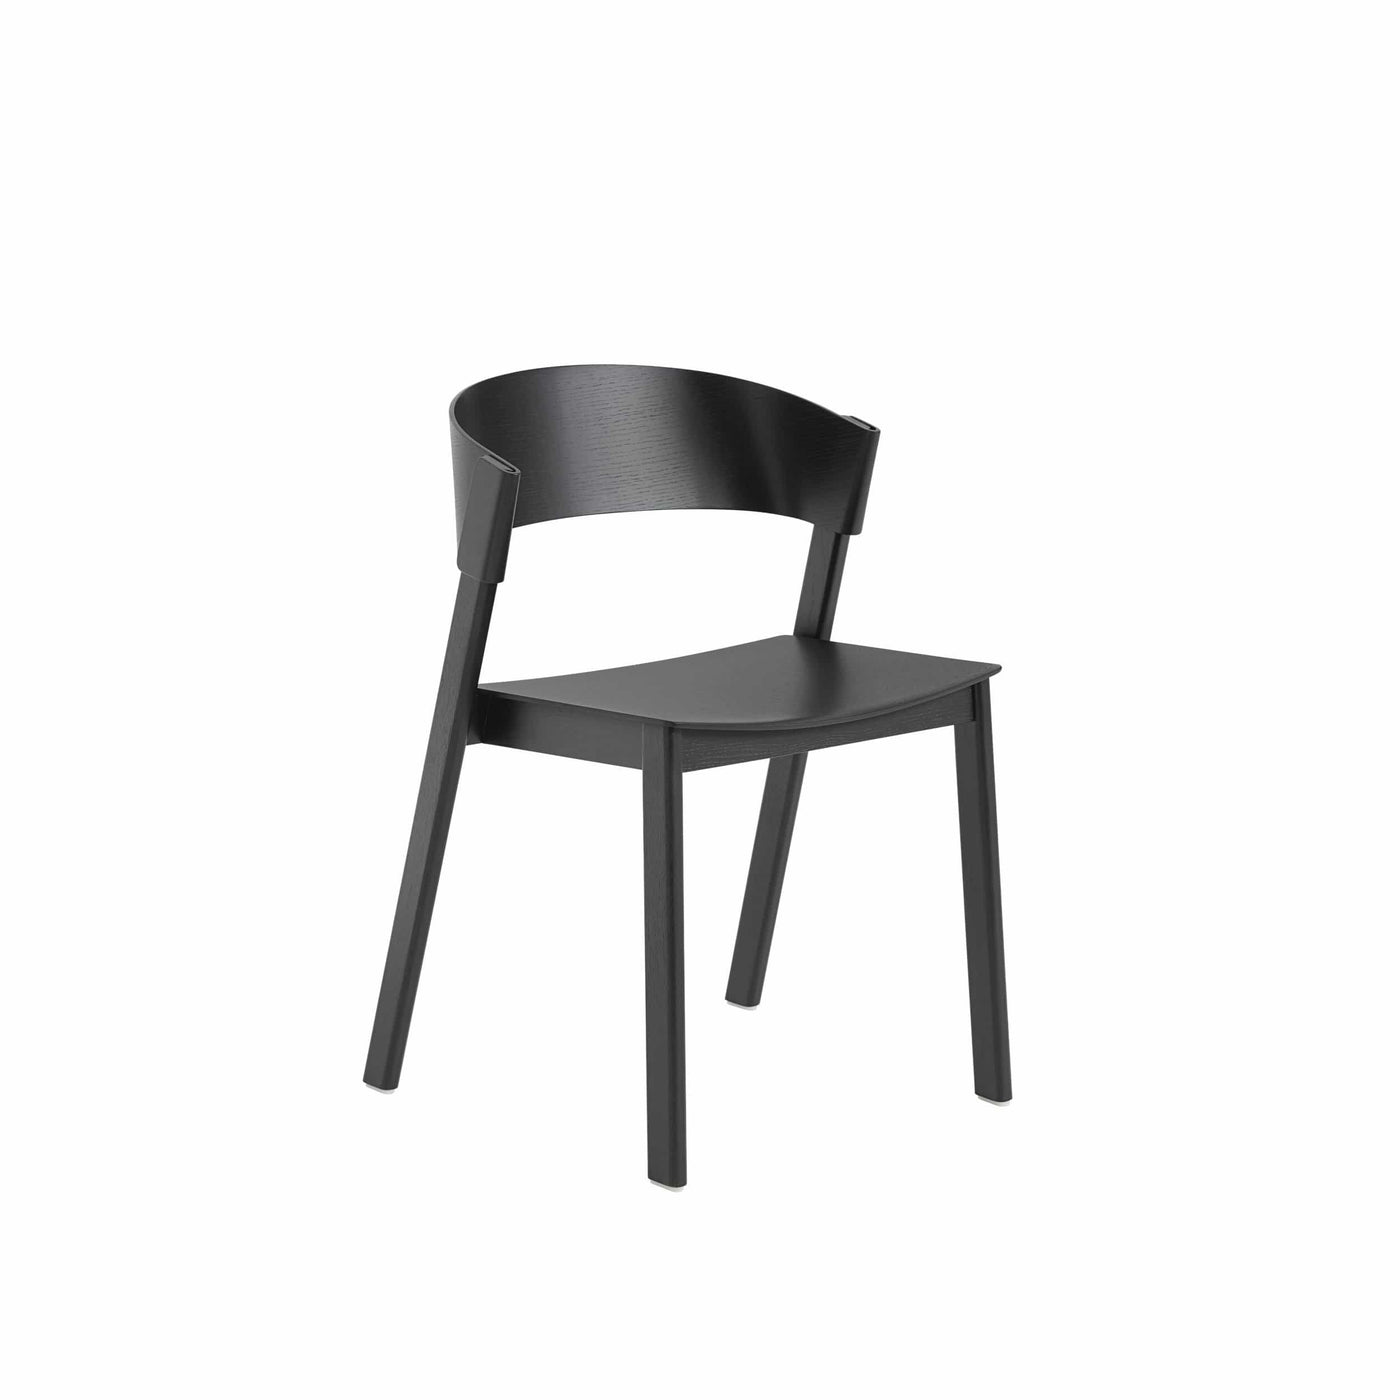 Muuto cover side chair in black, available from someday designs. #colour_black